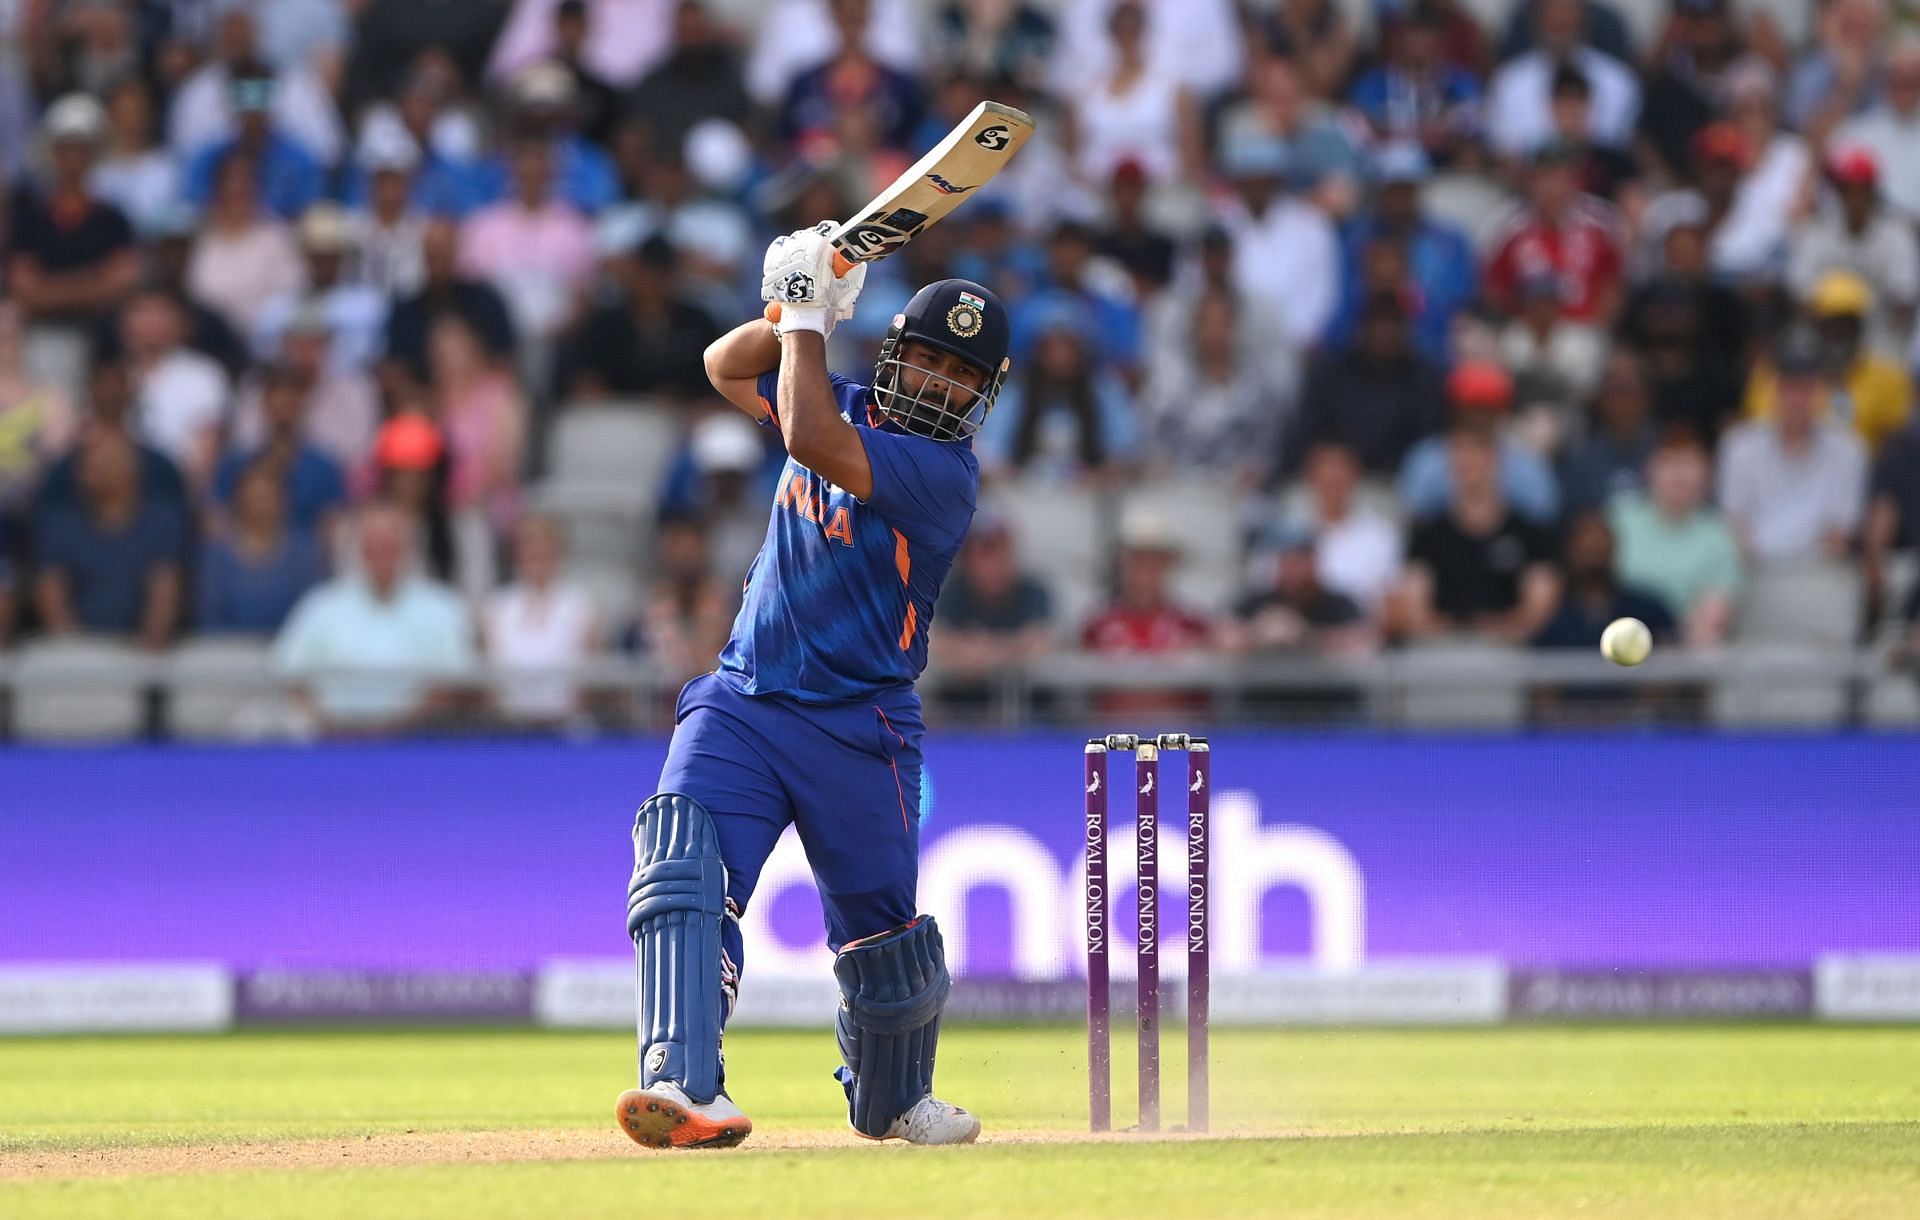 Rishabh Pant presents India with an excellent left-handed option in the middle order.